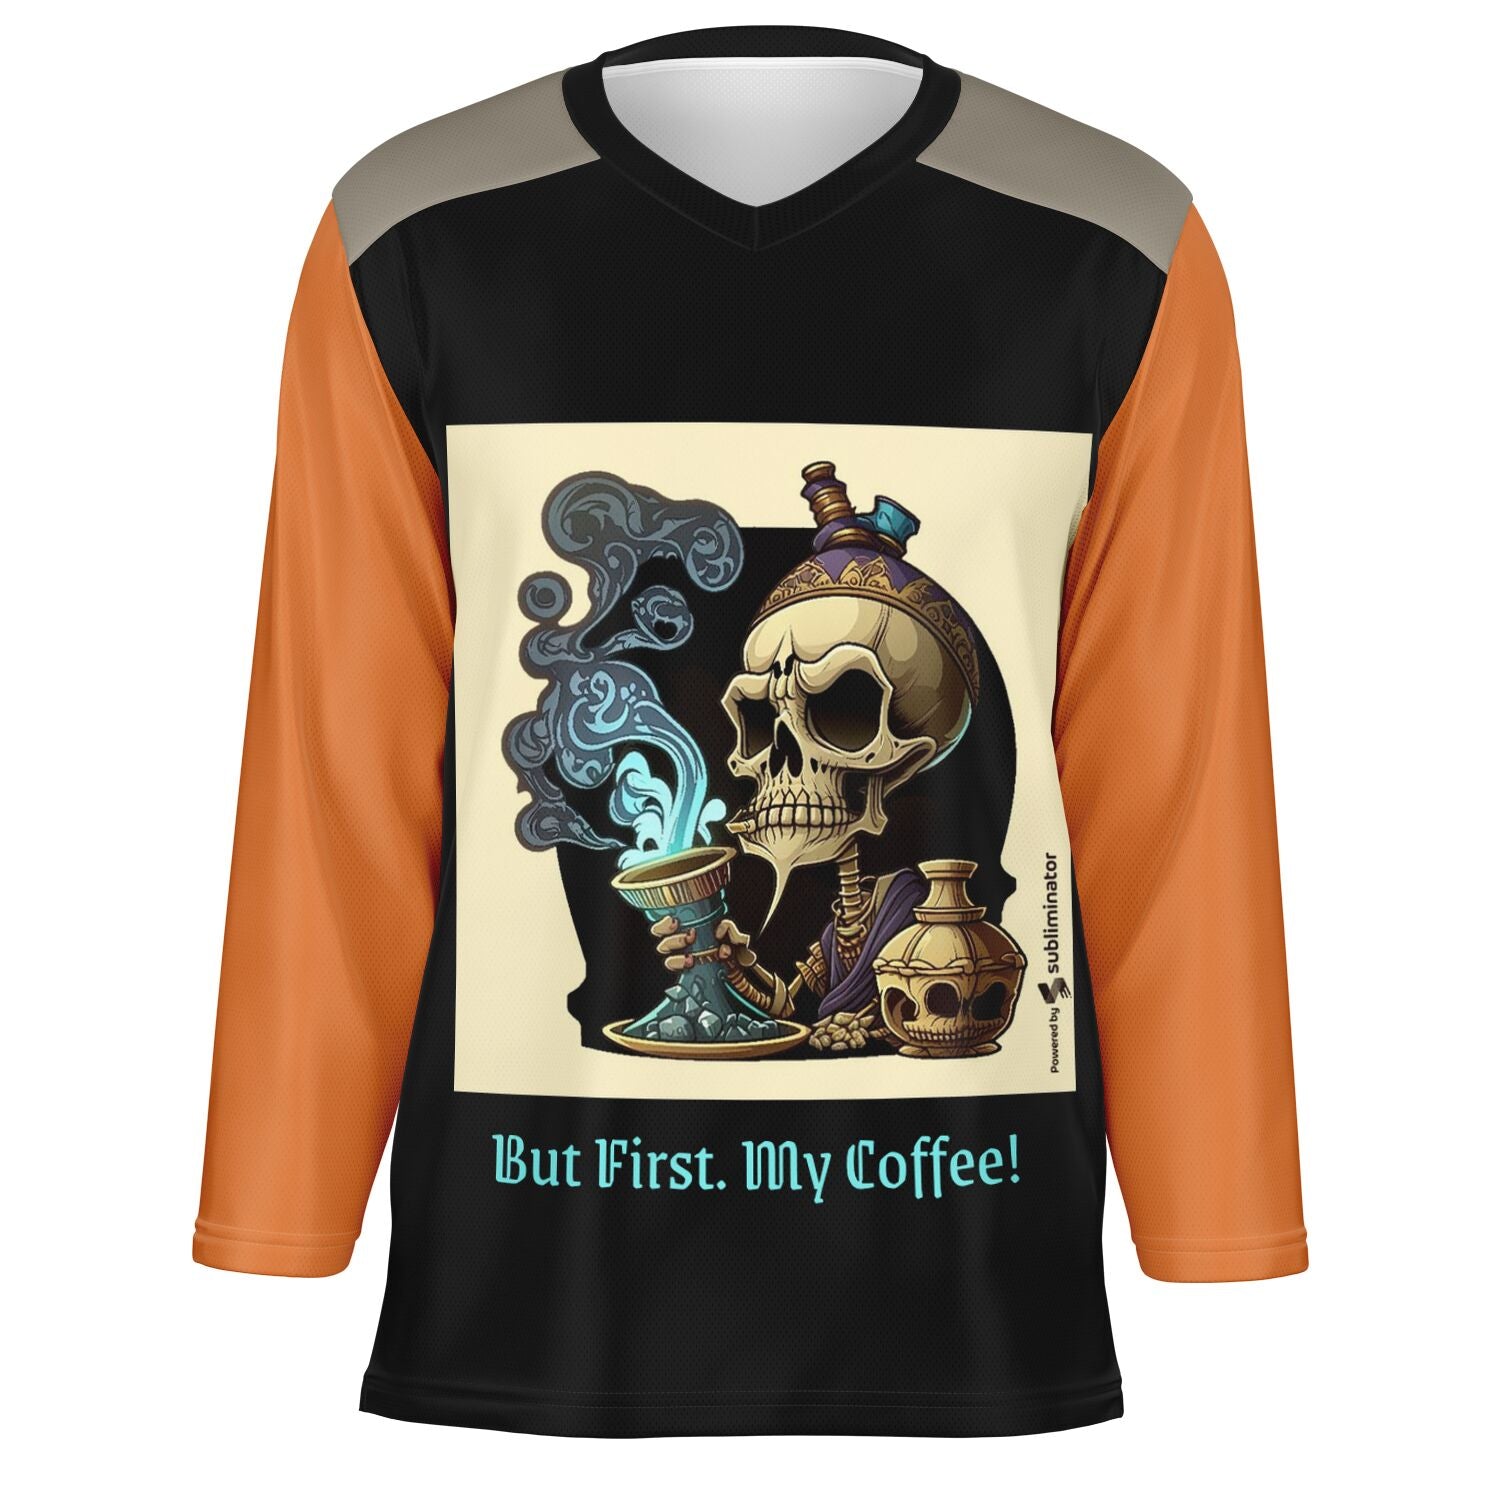 "But First My Coffee" Ice Hockey Jersey - AOP